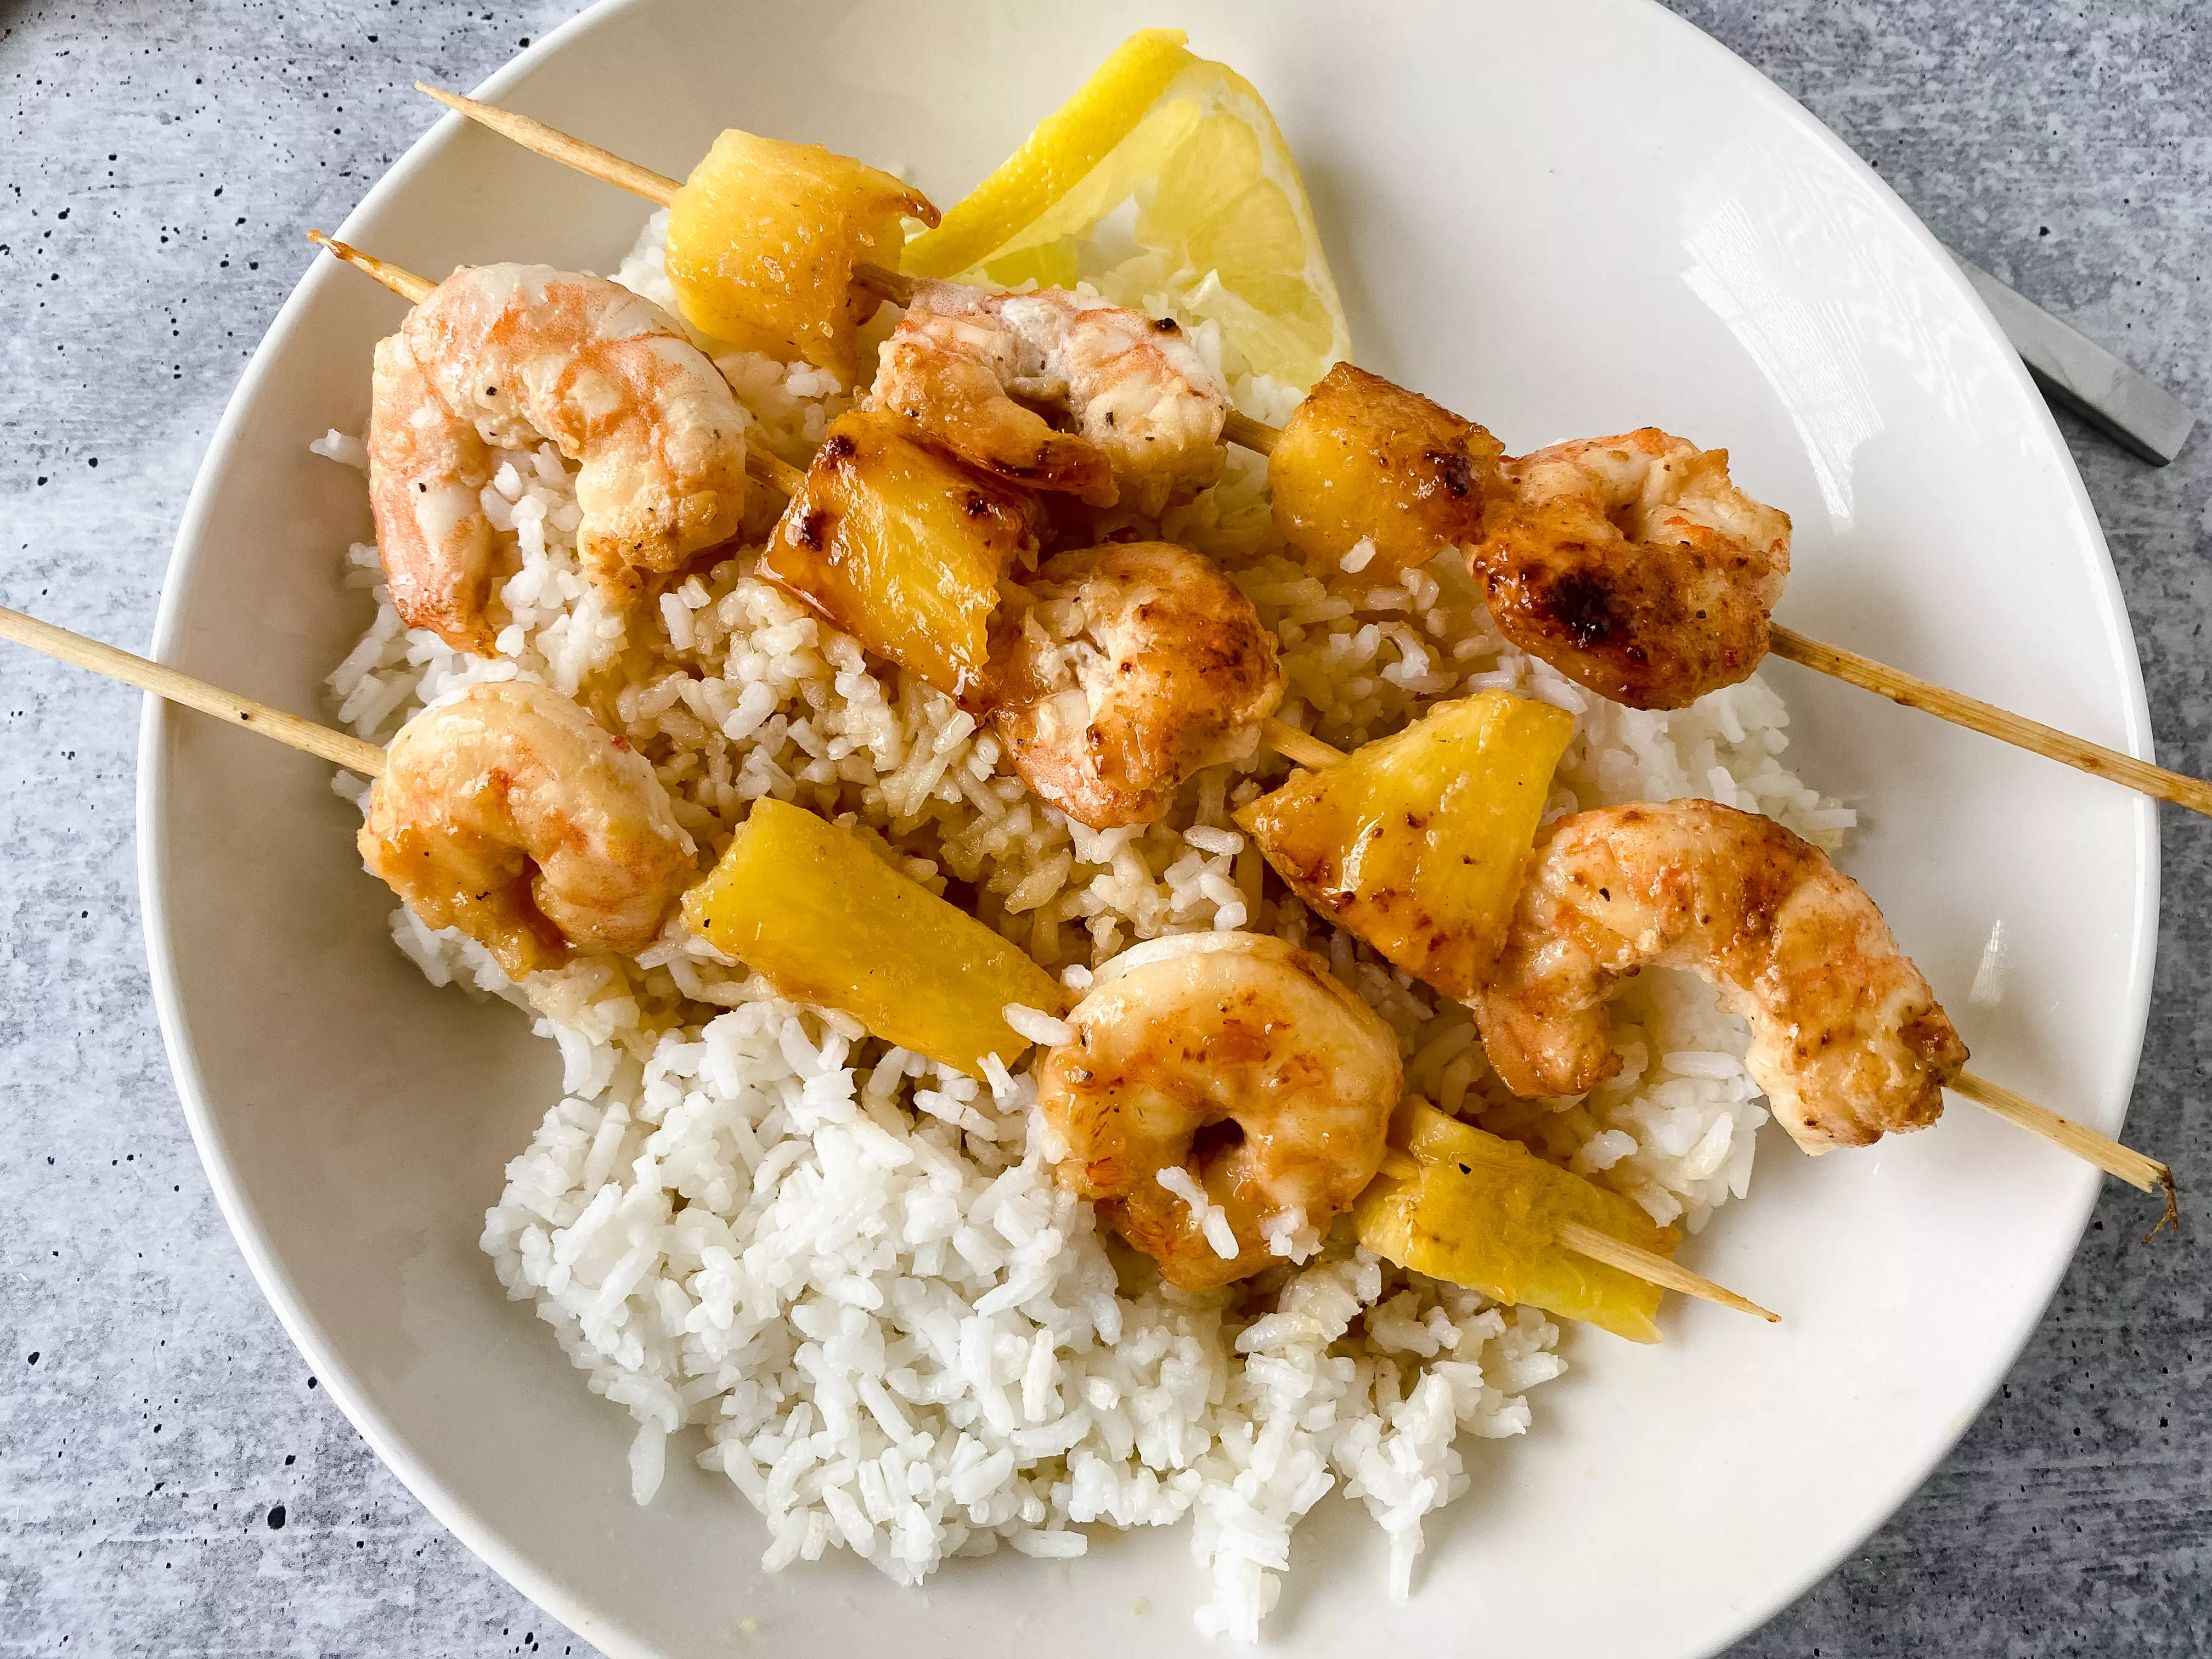 prepared honey garlic shrimp and pineapple kabobs on rice from above